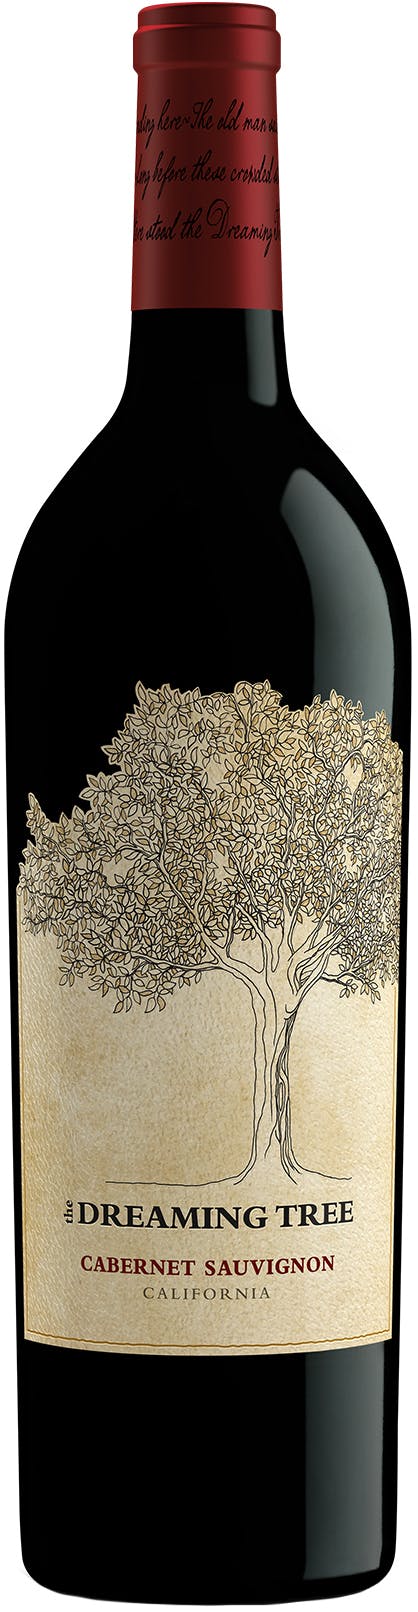 images/wine/Red Wine/The Dreamin Tree Cabernet Sauvignon .jpg